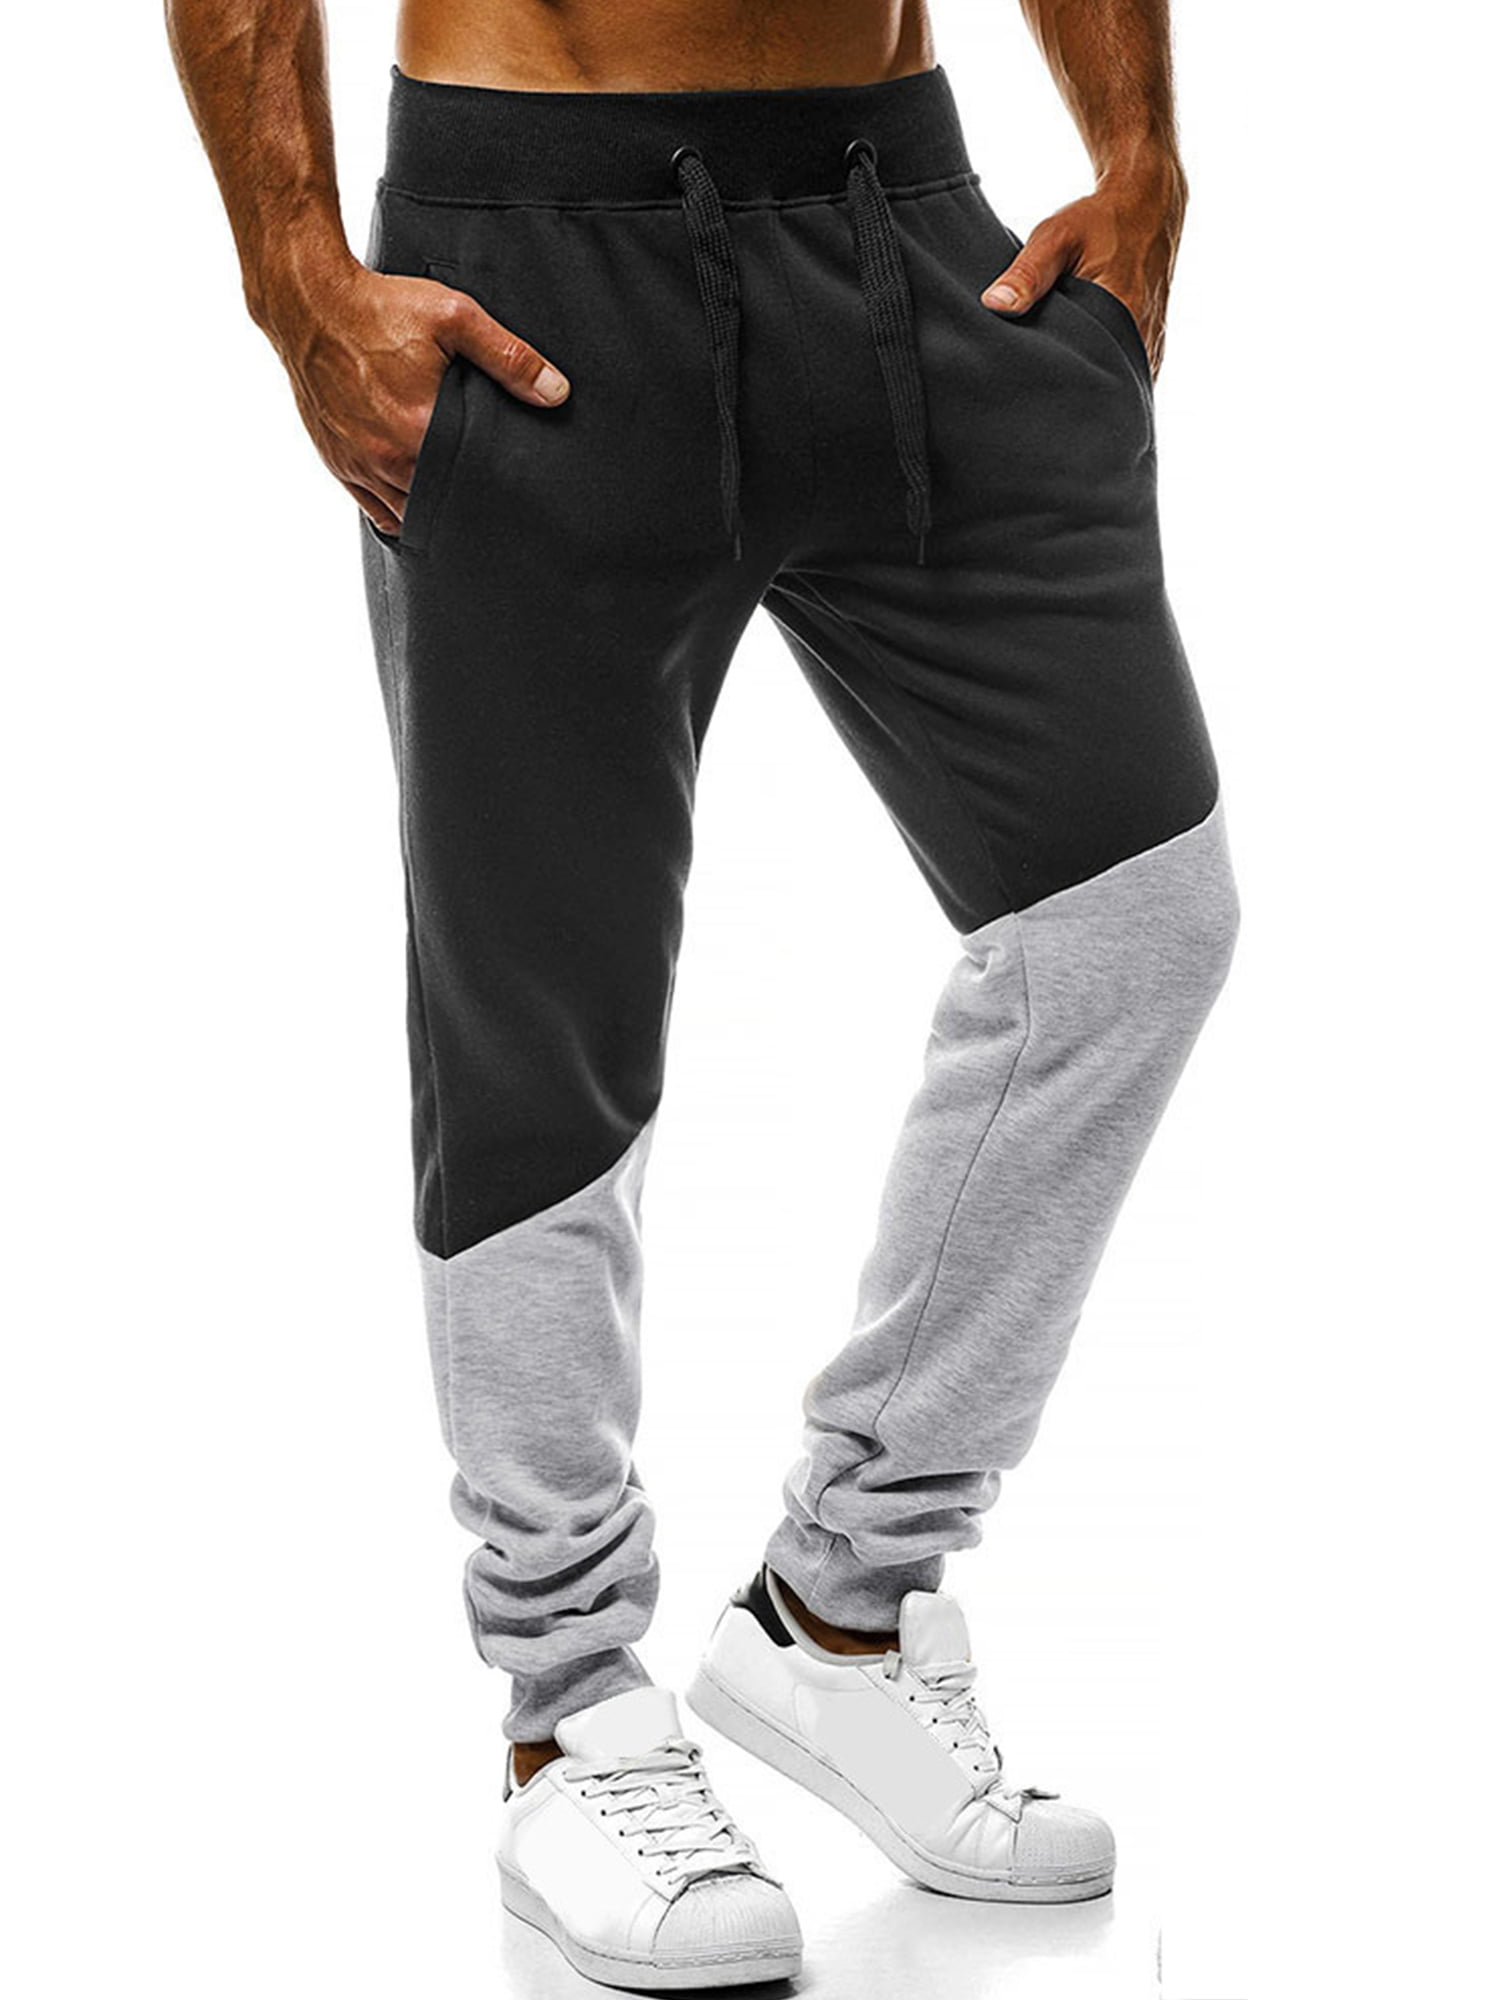 Mens Casual Pants Activewear Bottom Gym Fitness Running Sweatpants Long Trouser 